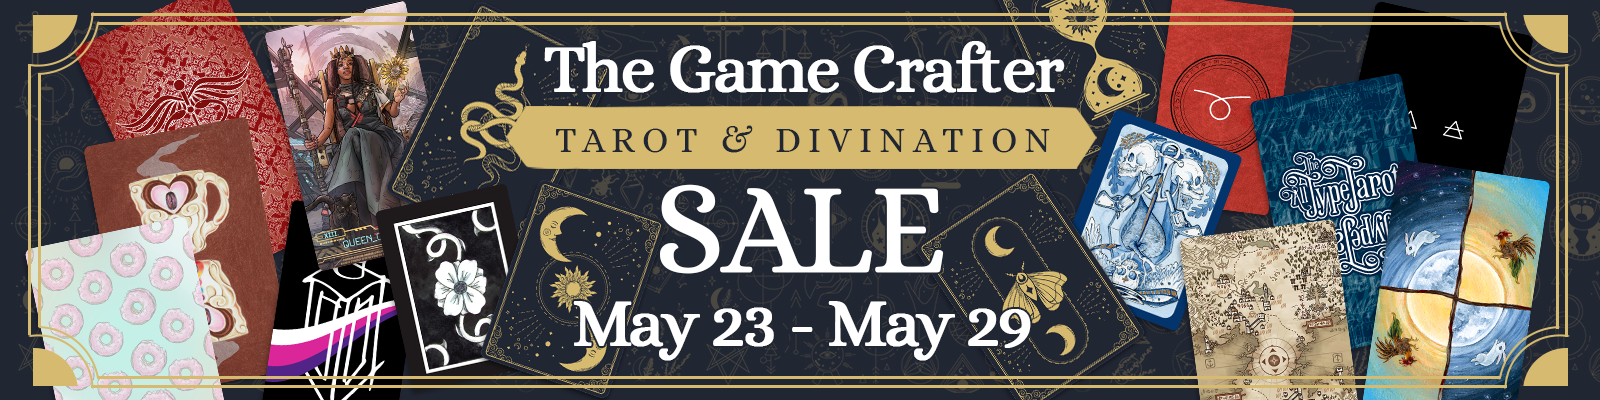 Tarot and Divination Sale header image